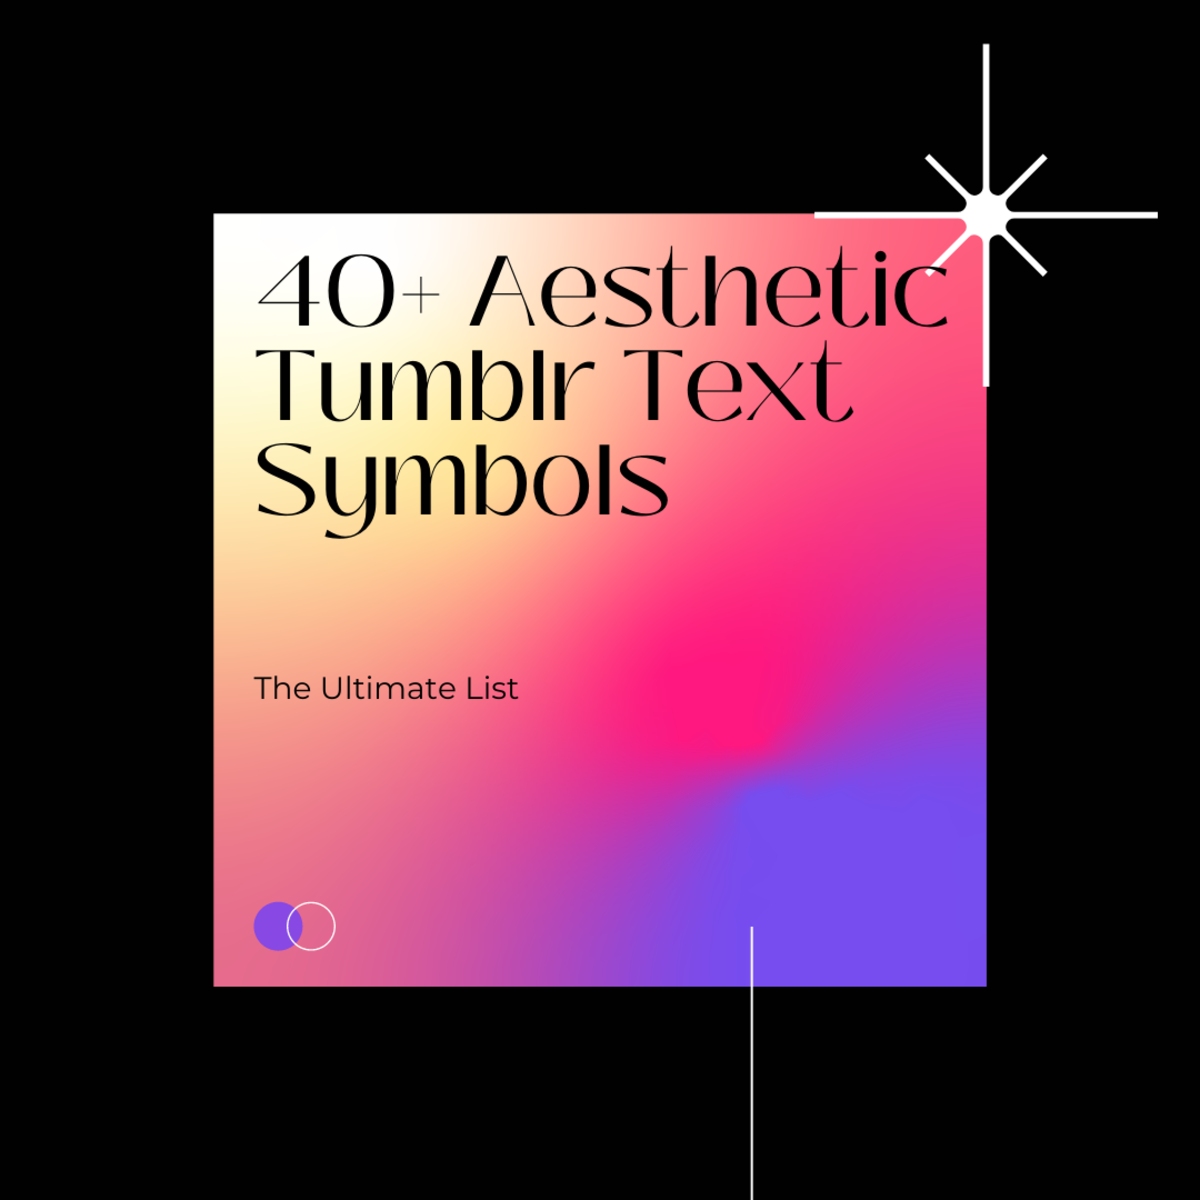 40+ Tumblr Symbols to Try Out: The Ultimate List